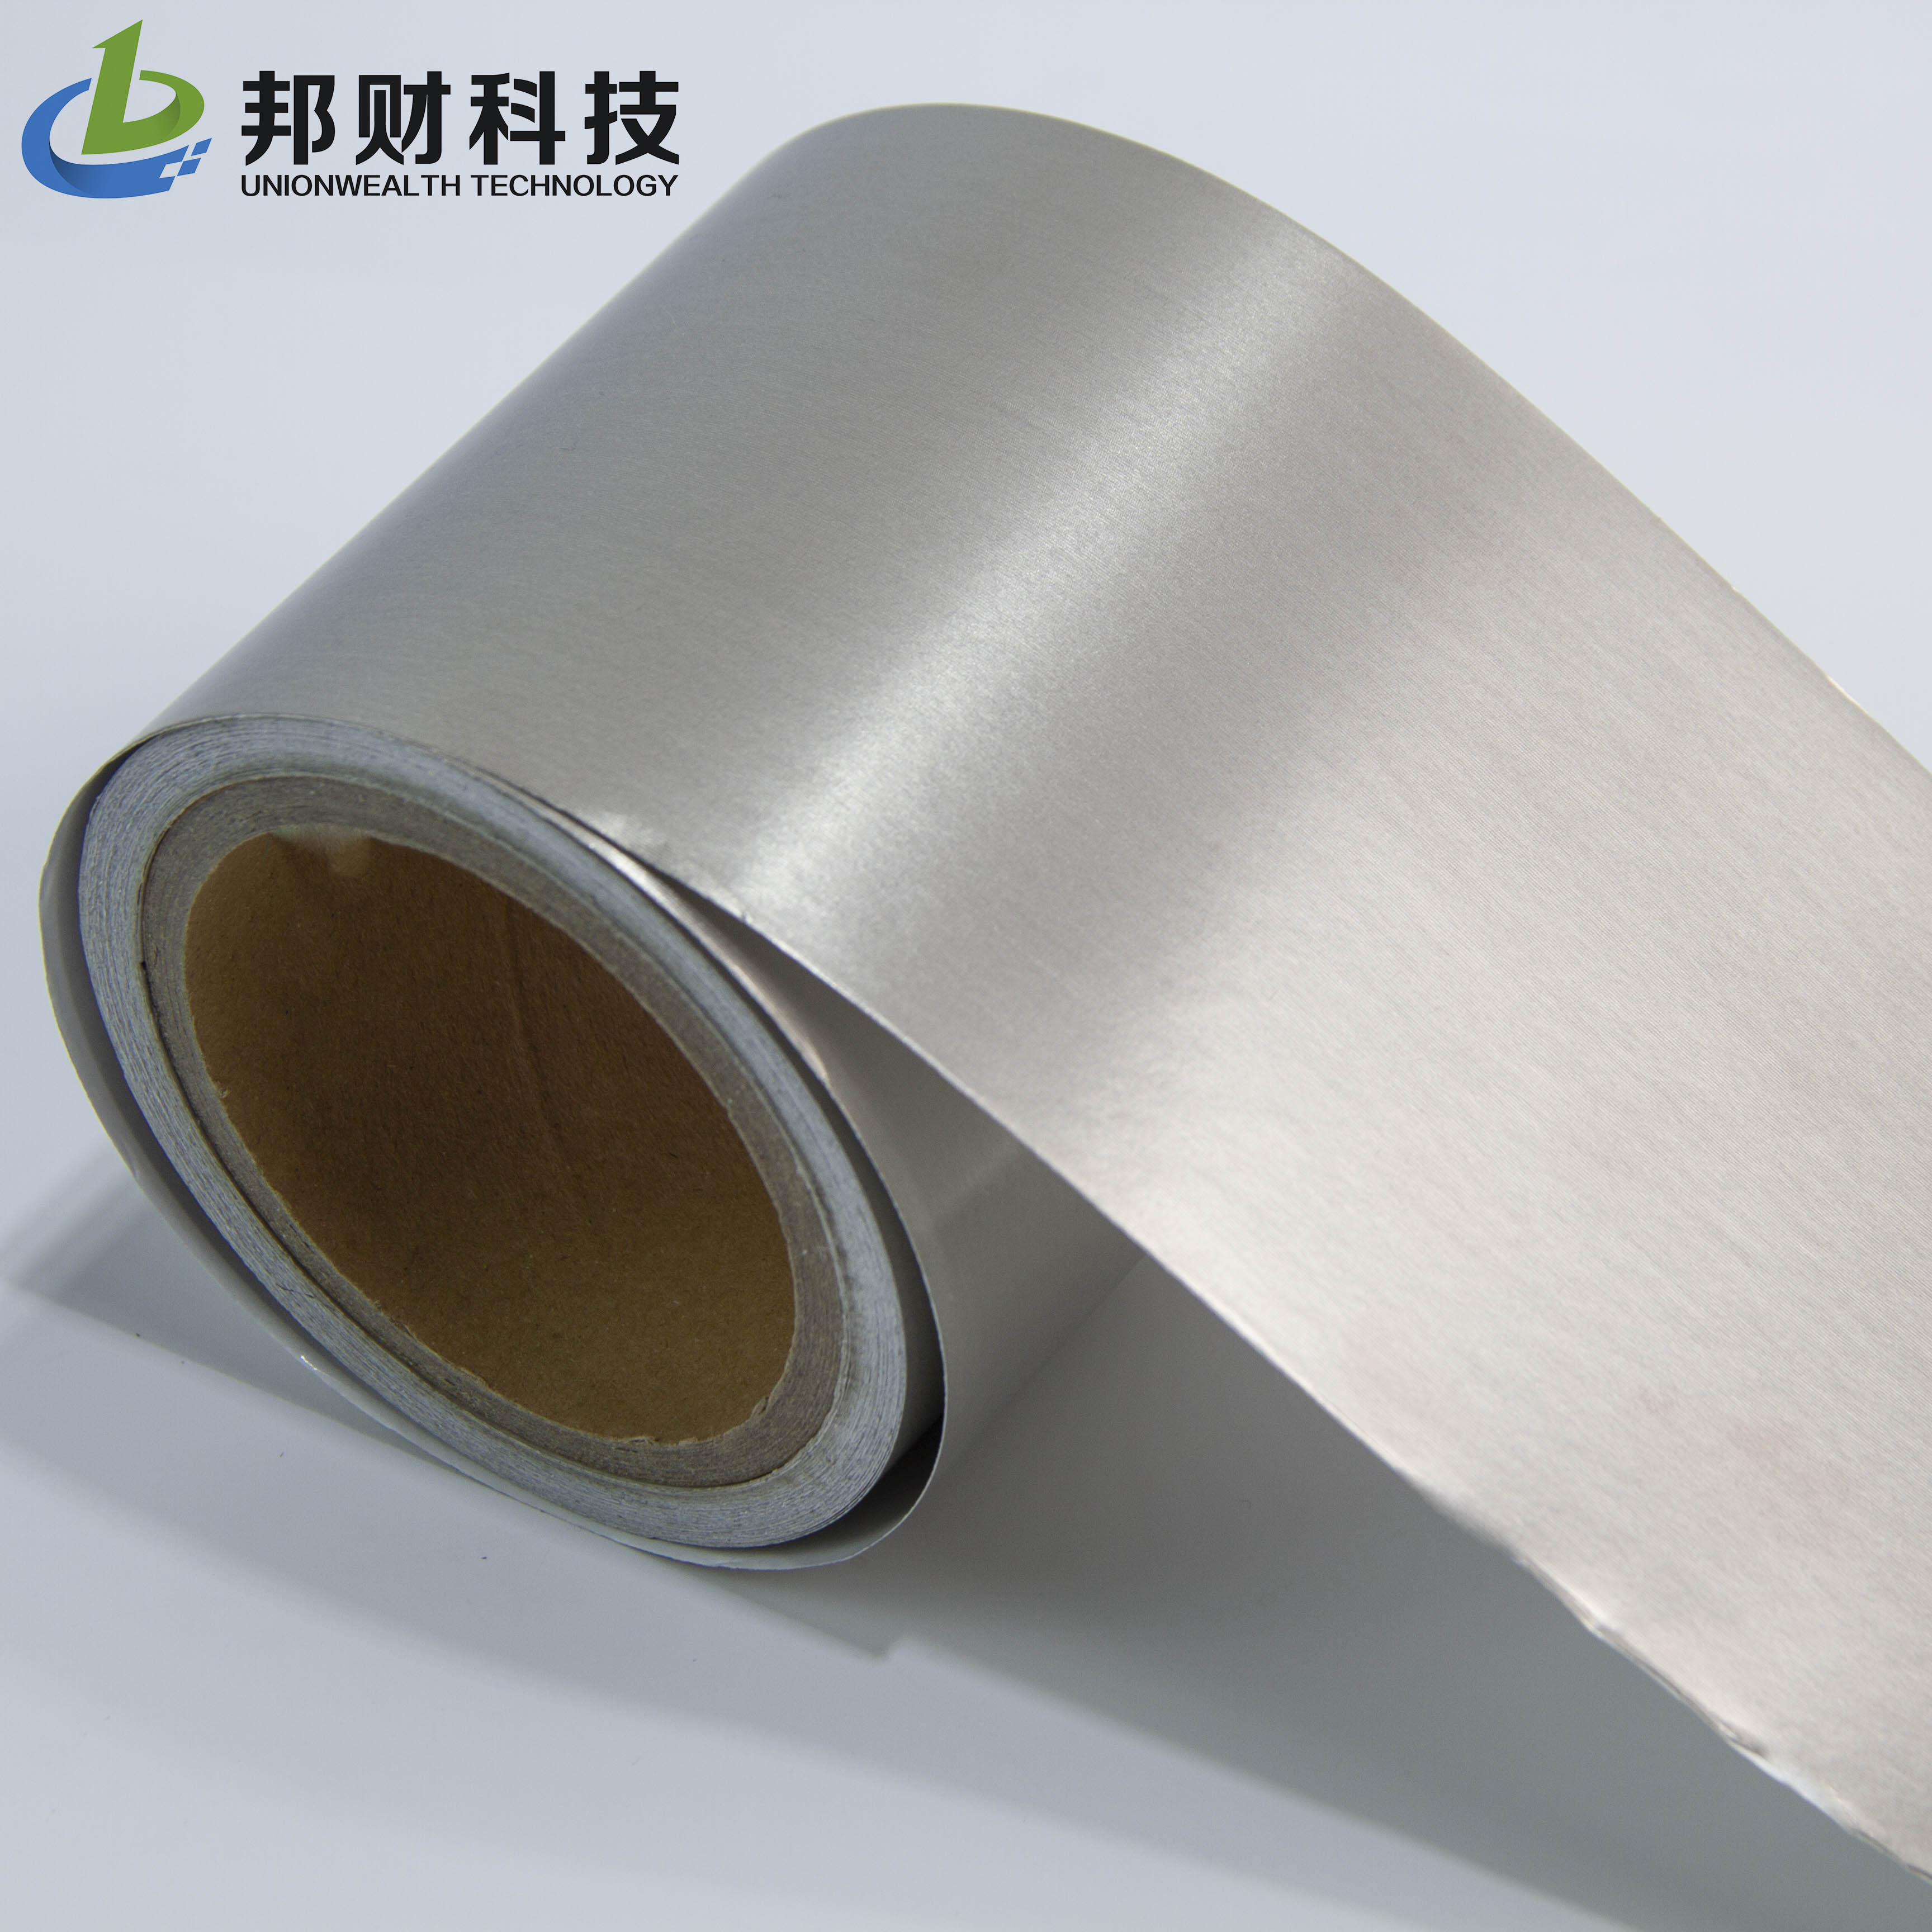 Polyester-based copper-plated nickel conductive electromagnetic wave shielding self-adhesive tape